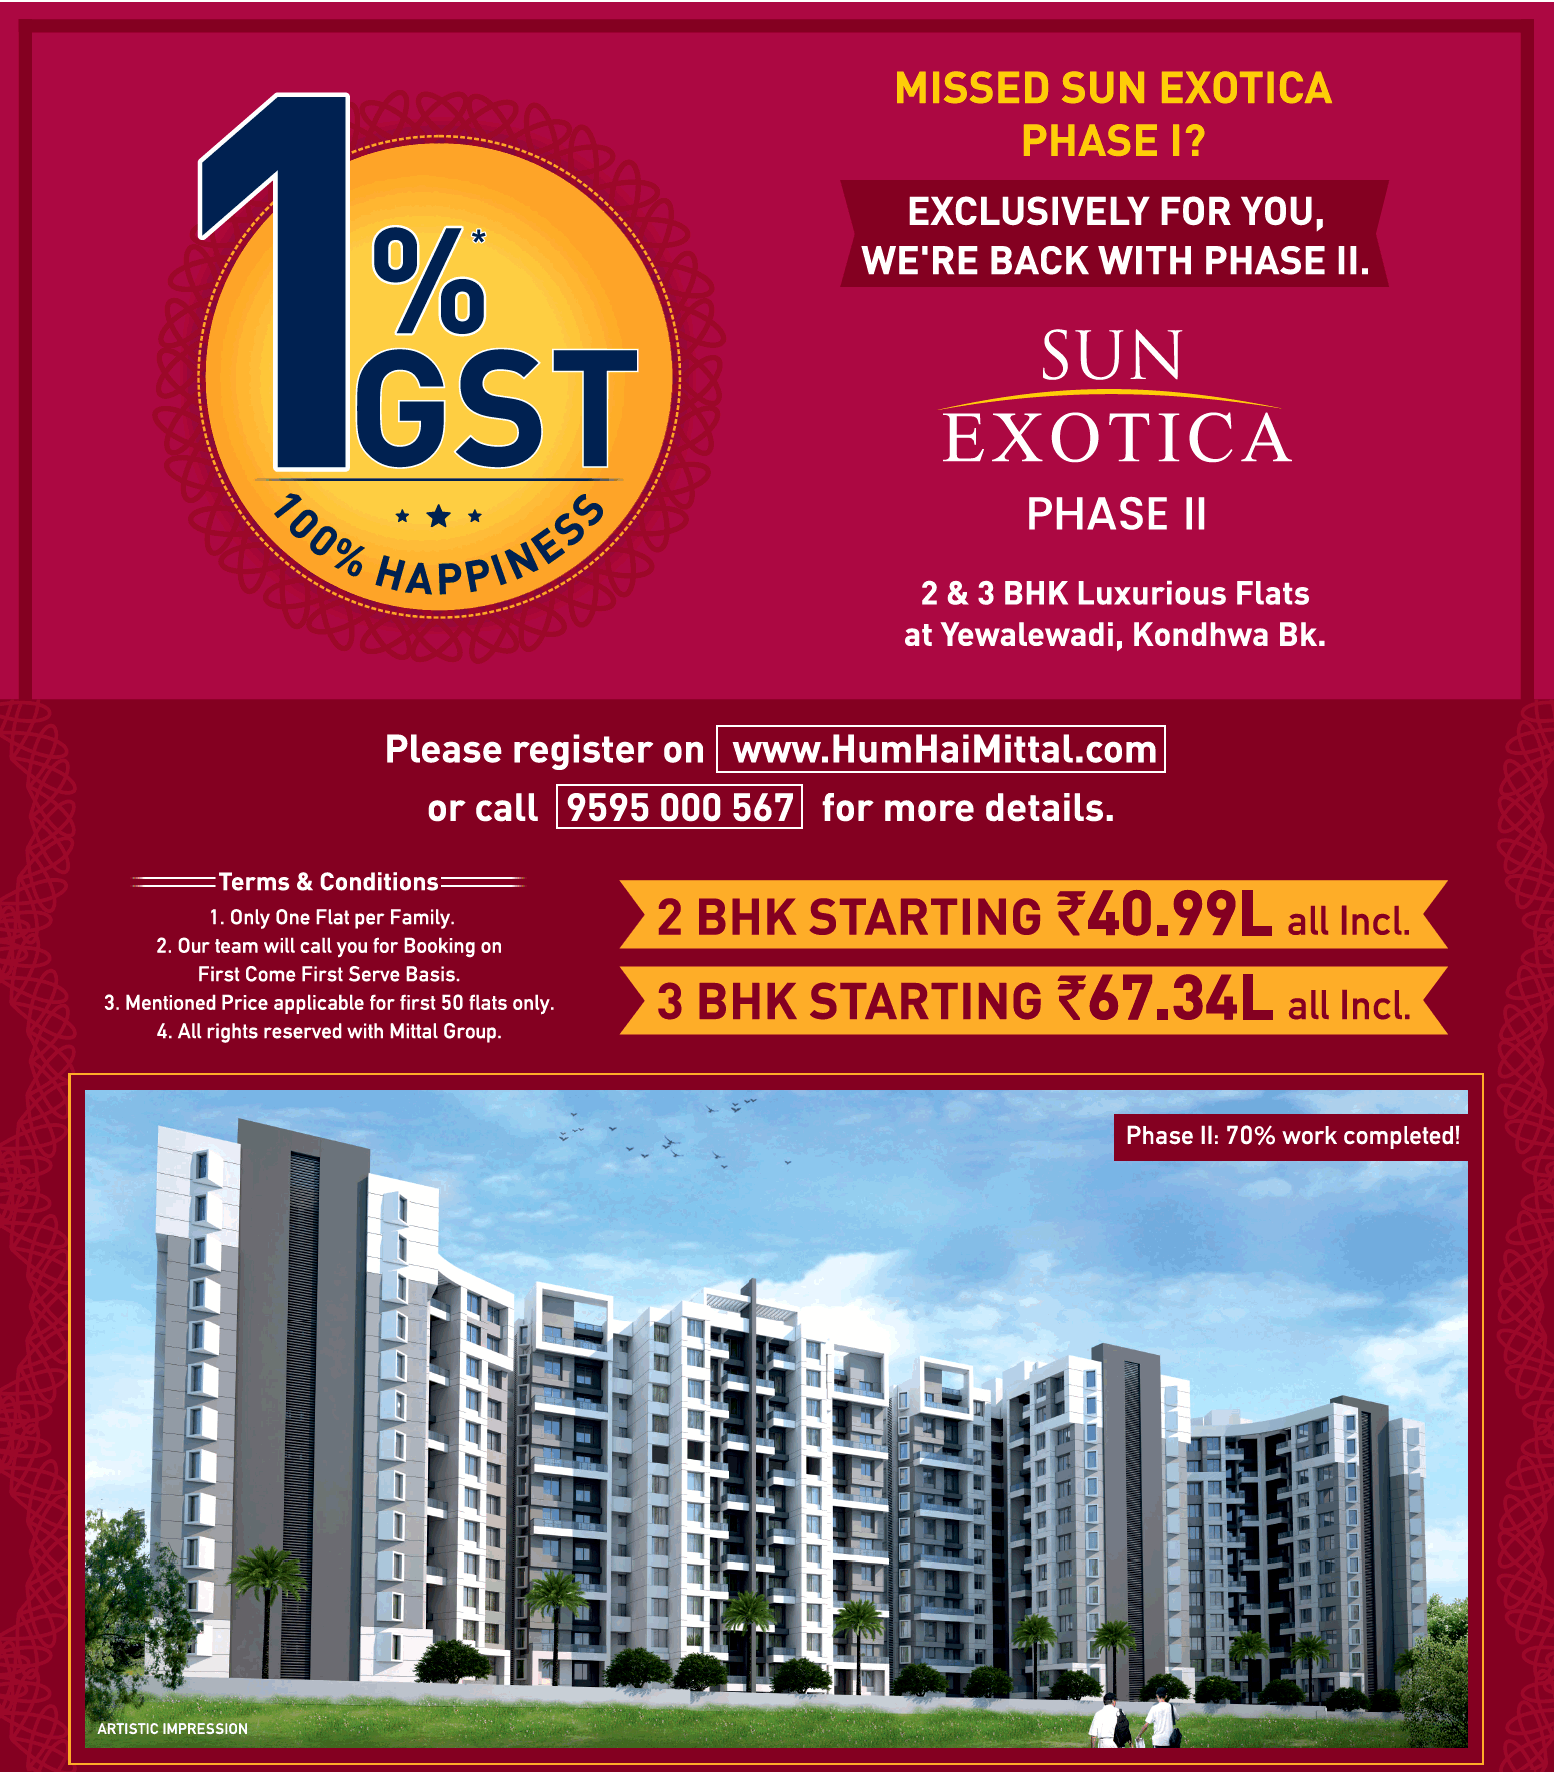 Pay just 1% GST at Mittal Sun Exotica Phase 2 in Pune Update